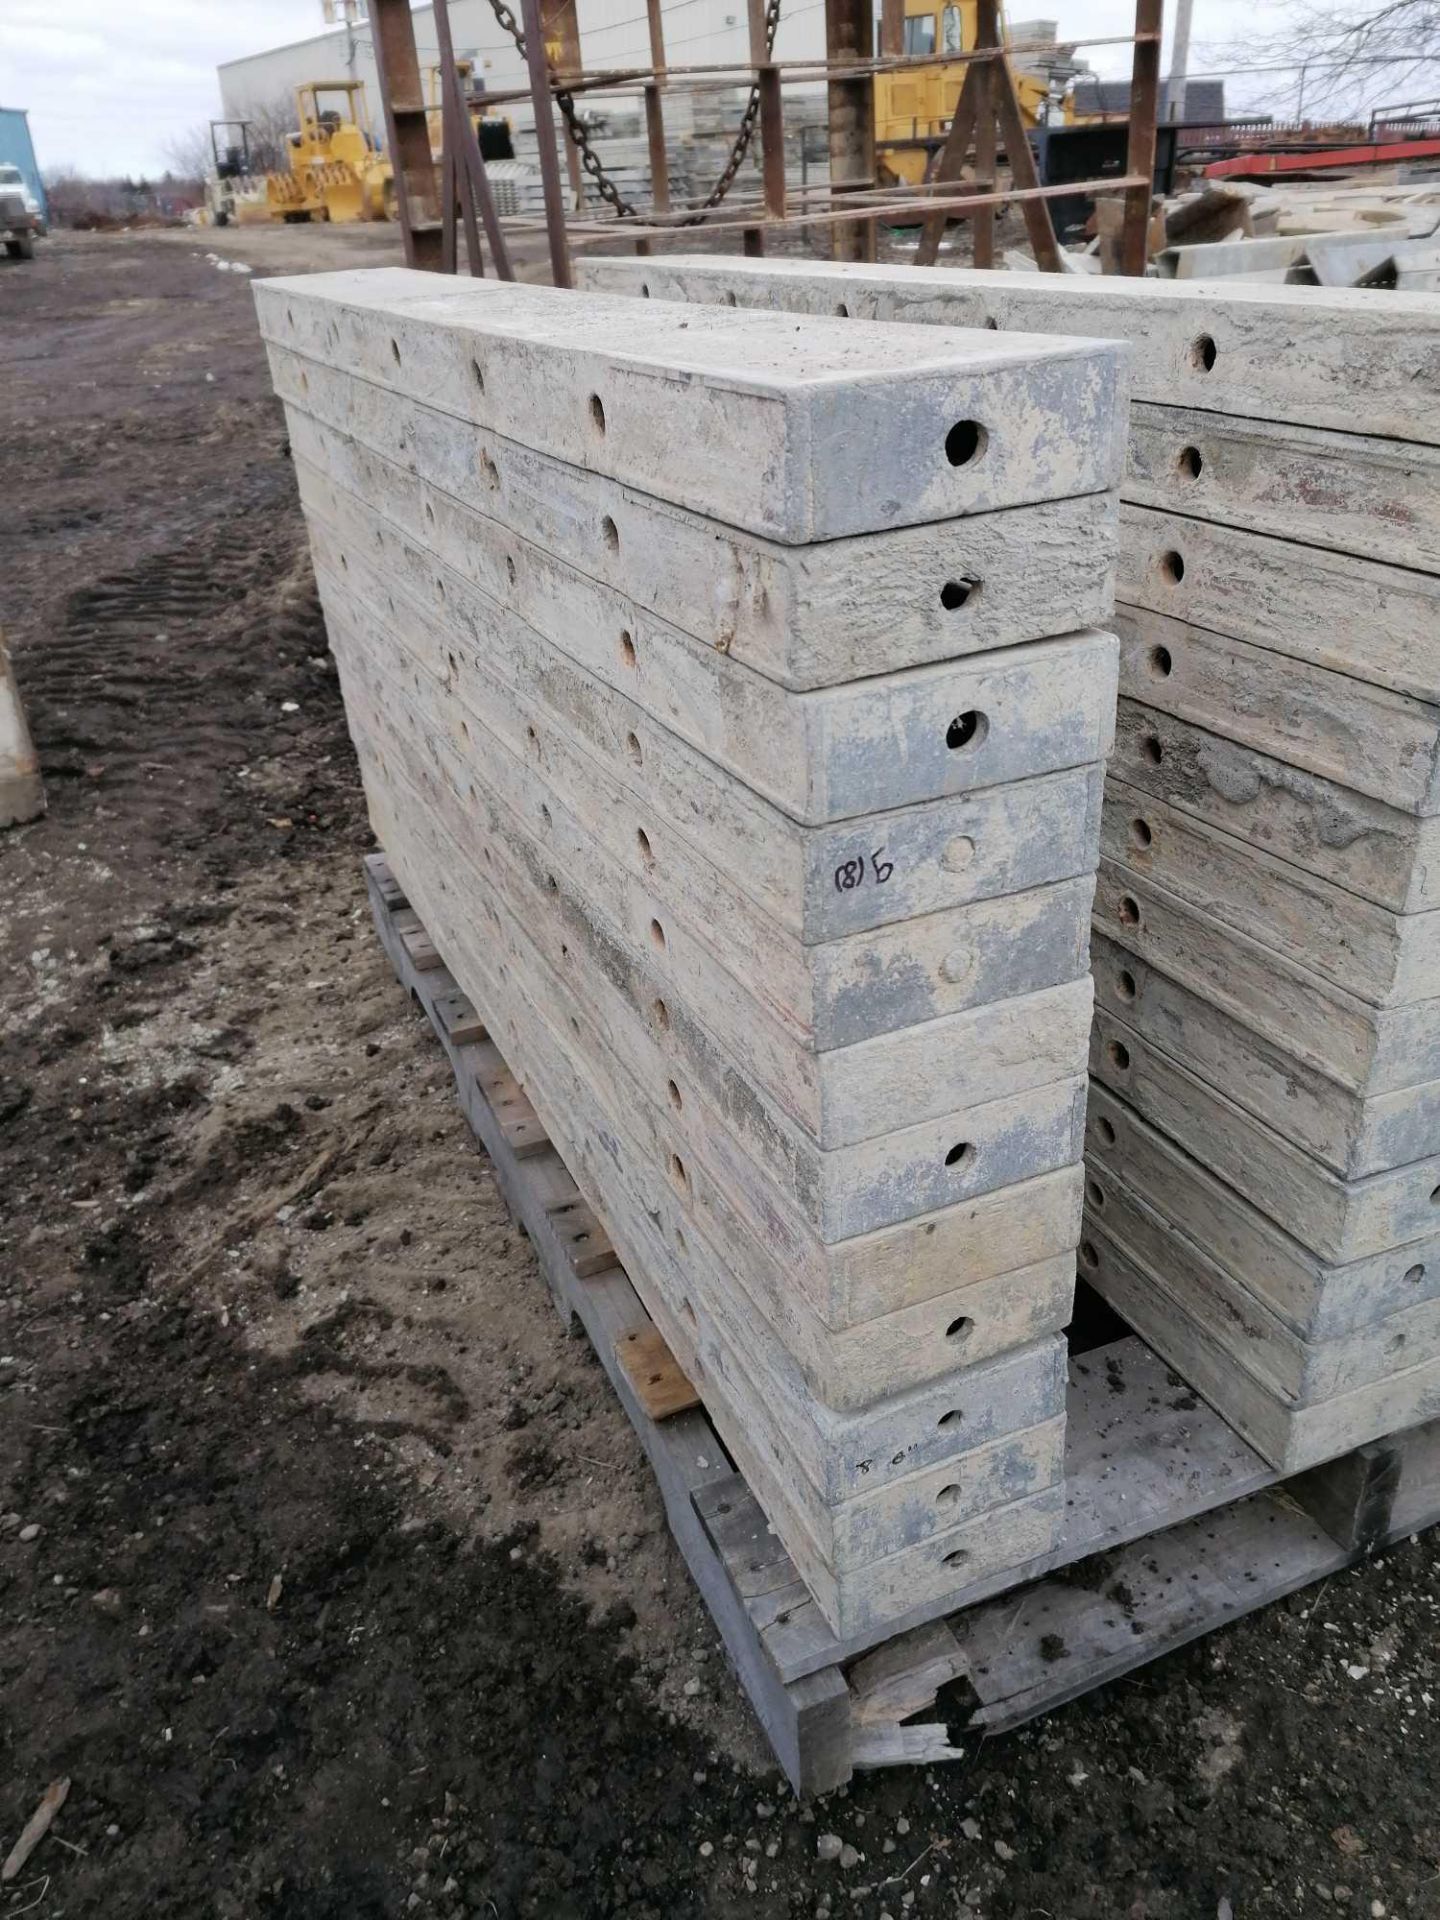 (12) 6" x 4' Wall-Ties / Durand Aluminum Concrete Forms, Smooth 8" Hole Pattern, Located in